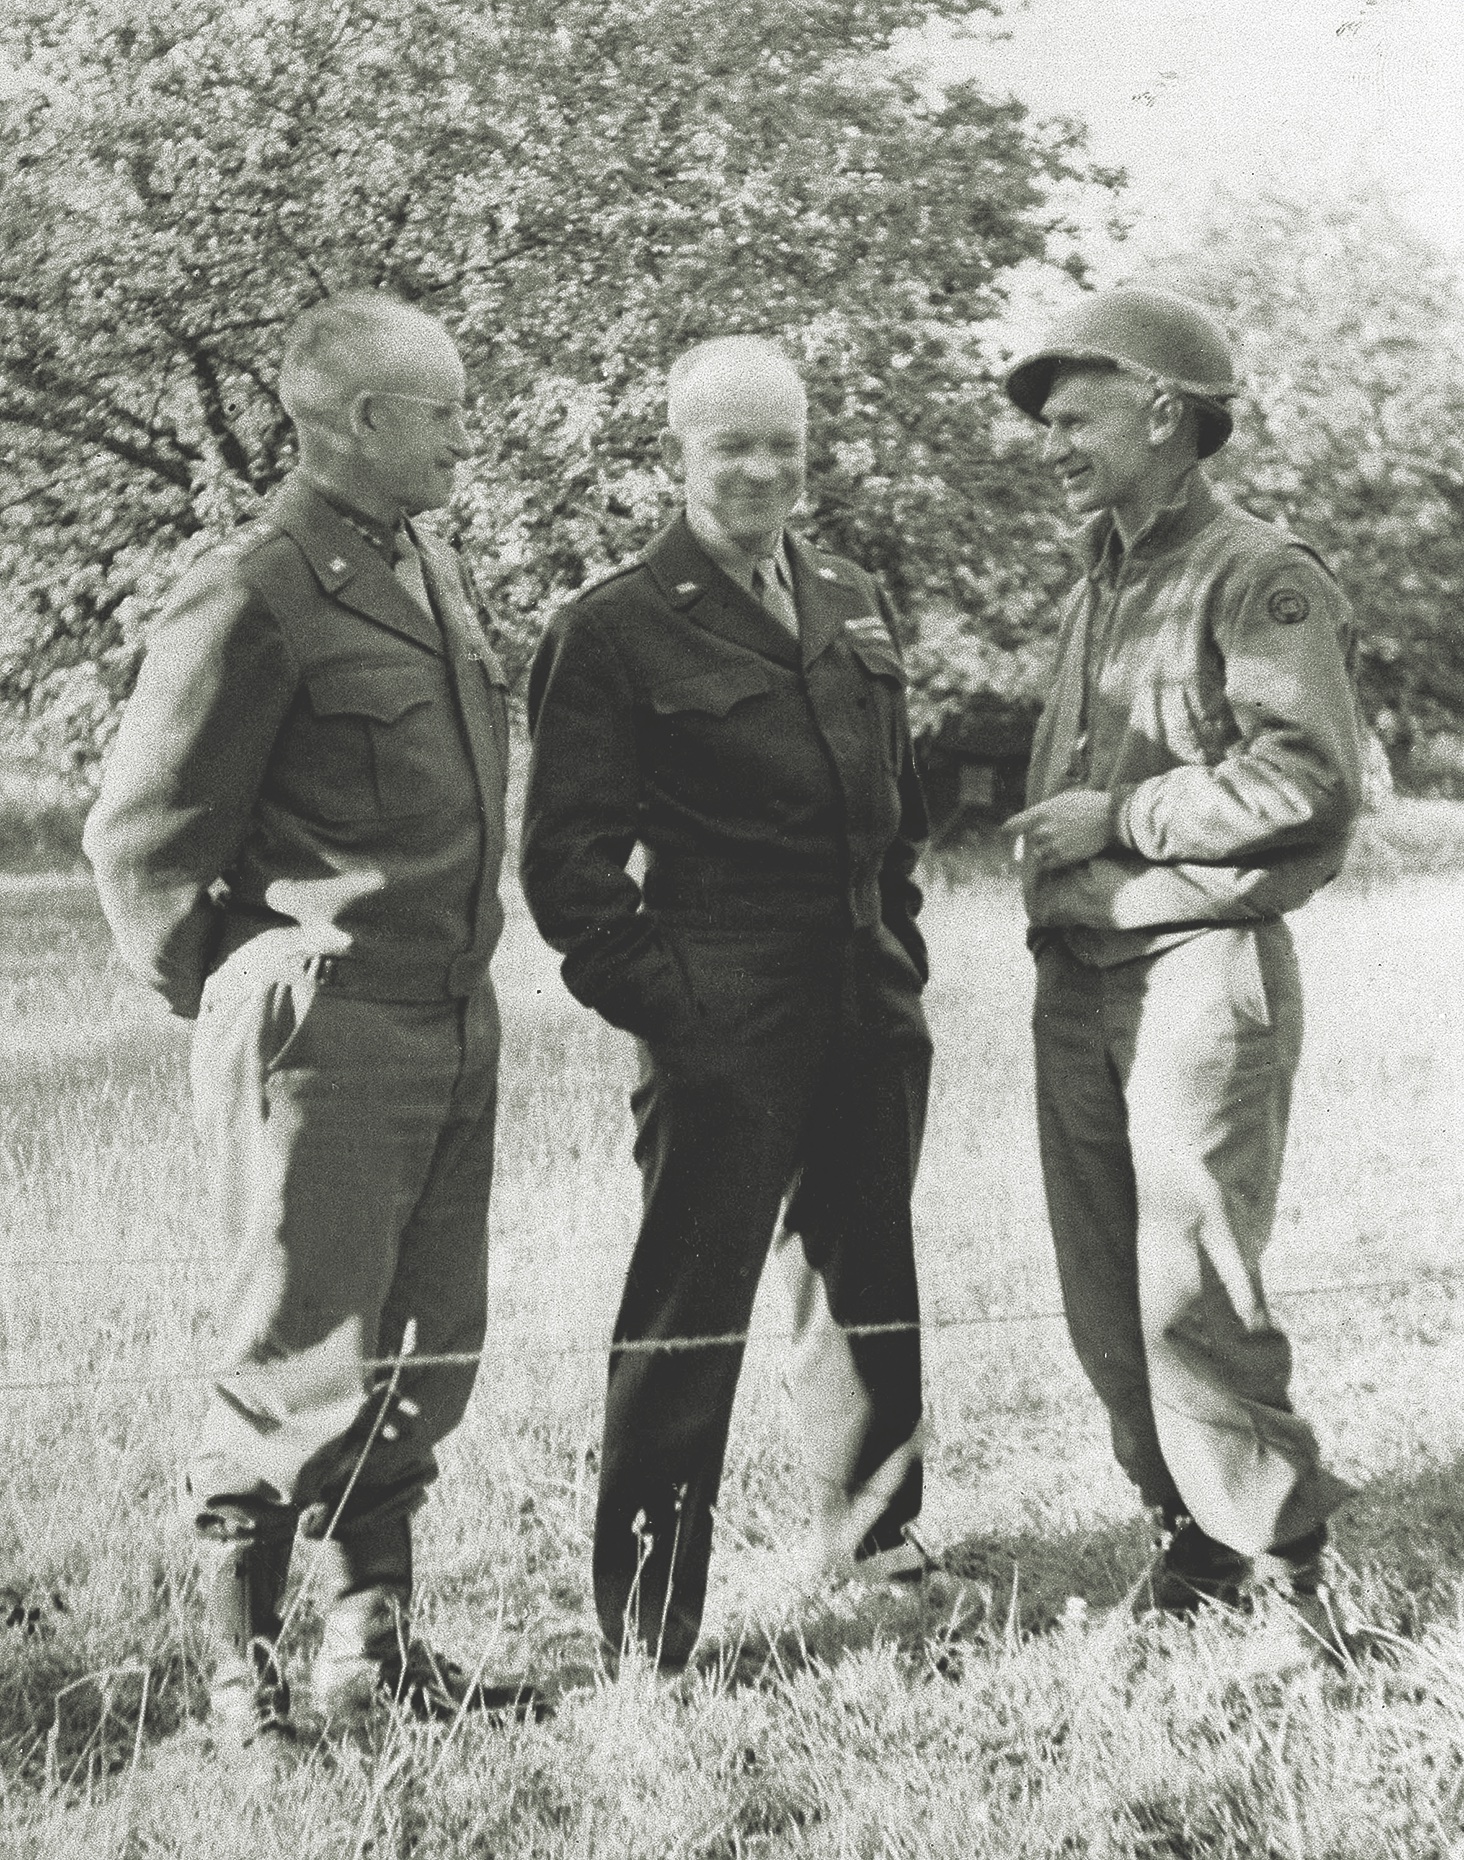 Pyle with General Dwight D. Eisenhower and Lieutenant General Omar Bradley in Normandy in July 1944. (Associated Press)